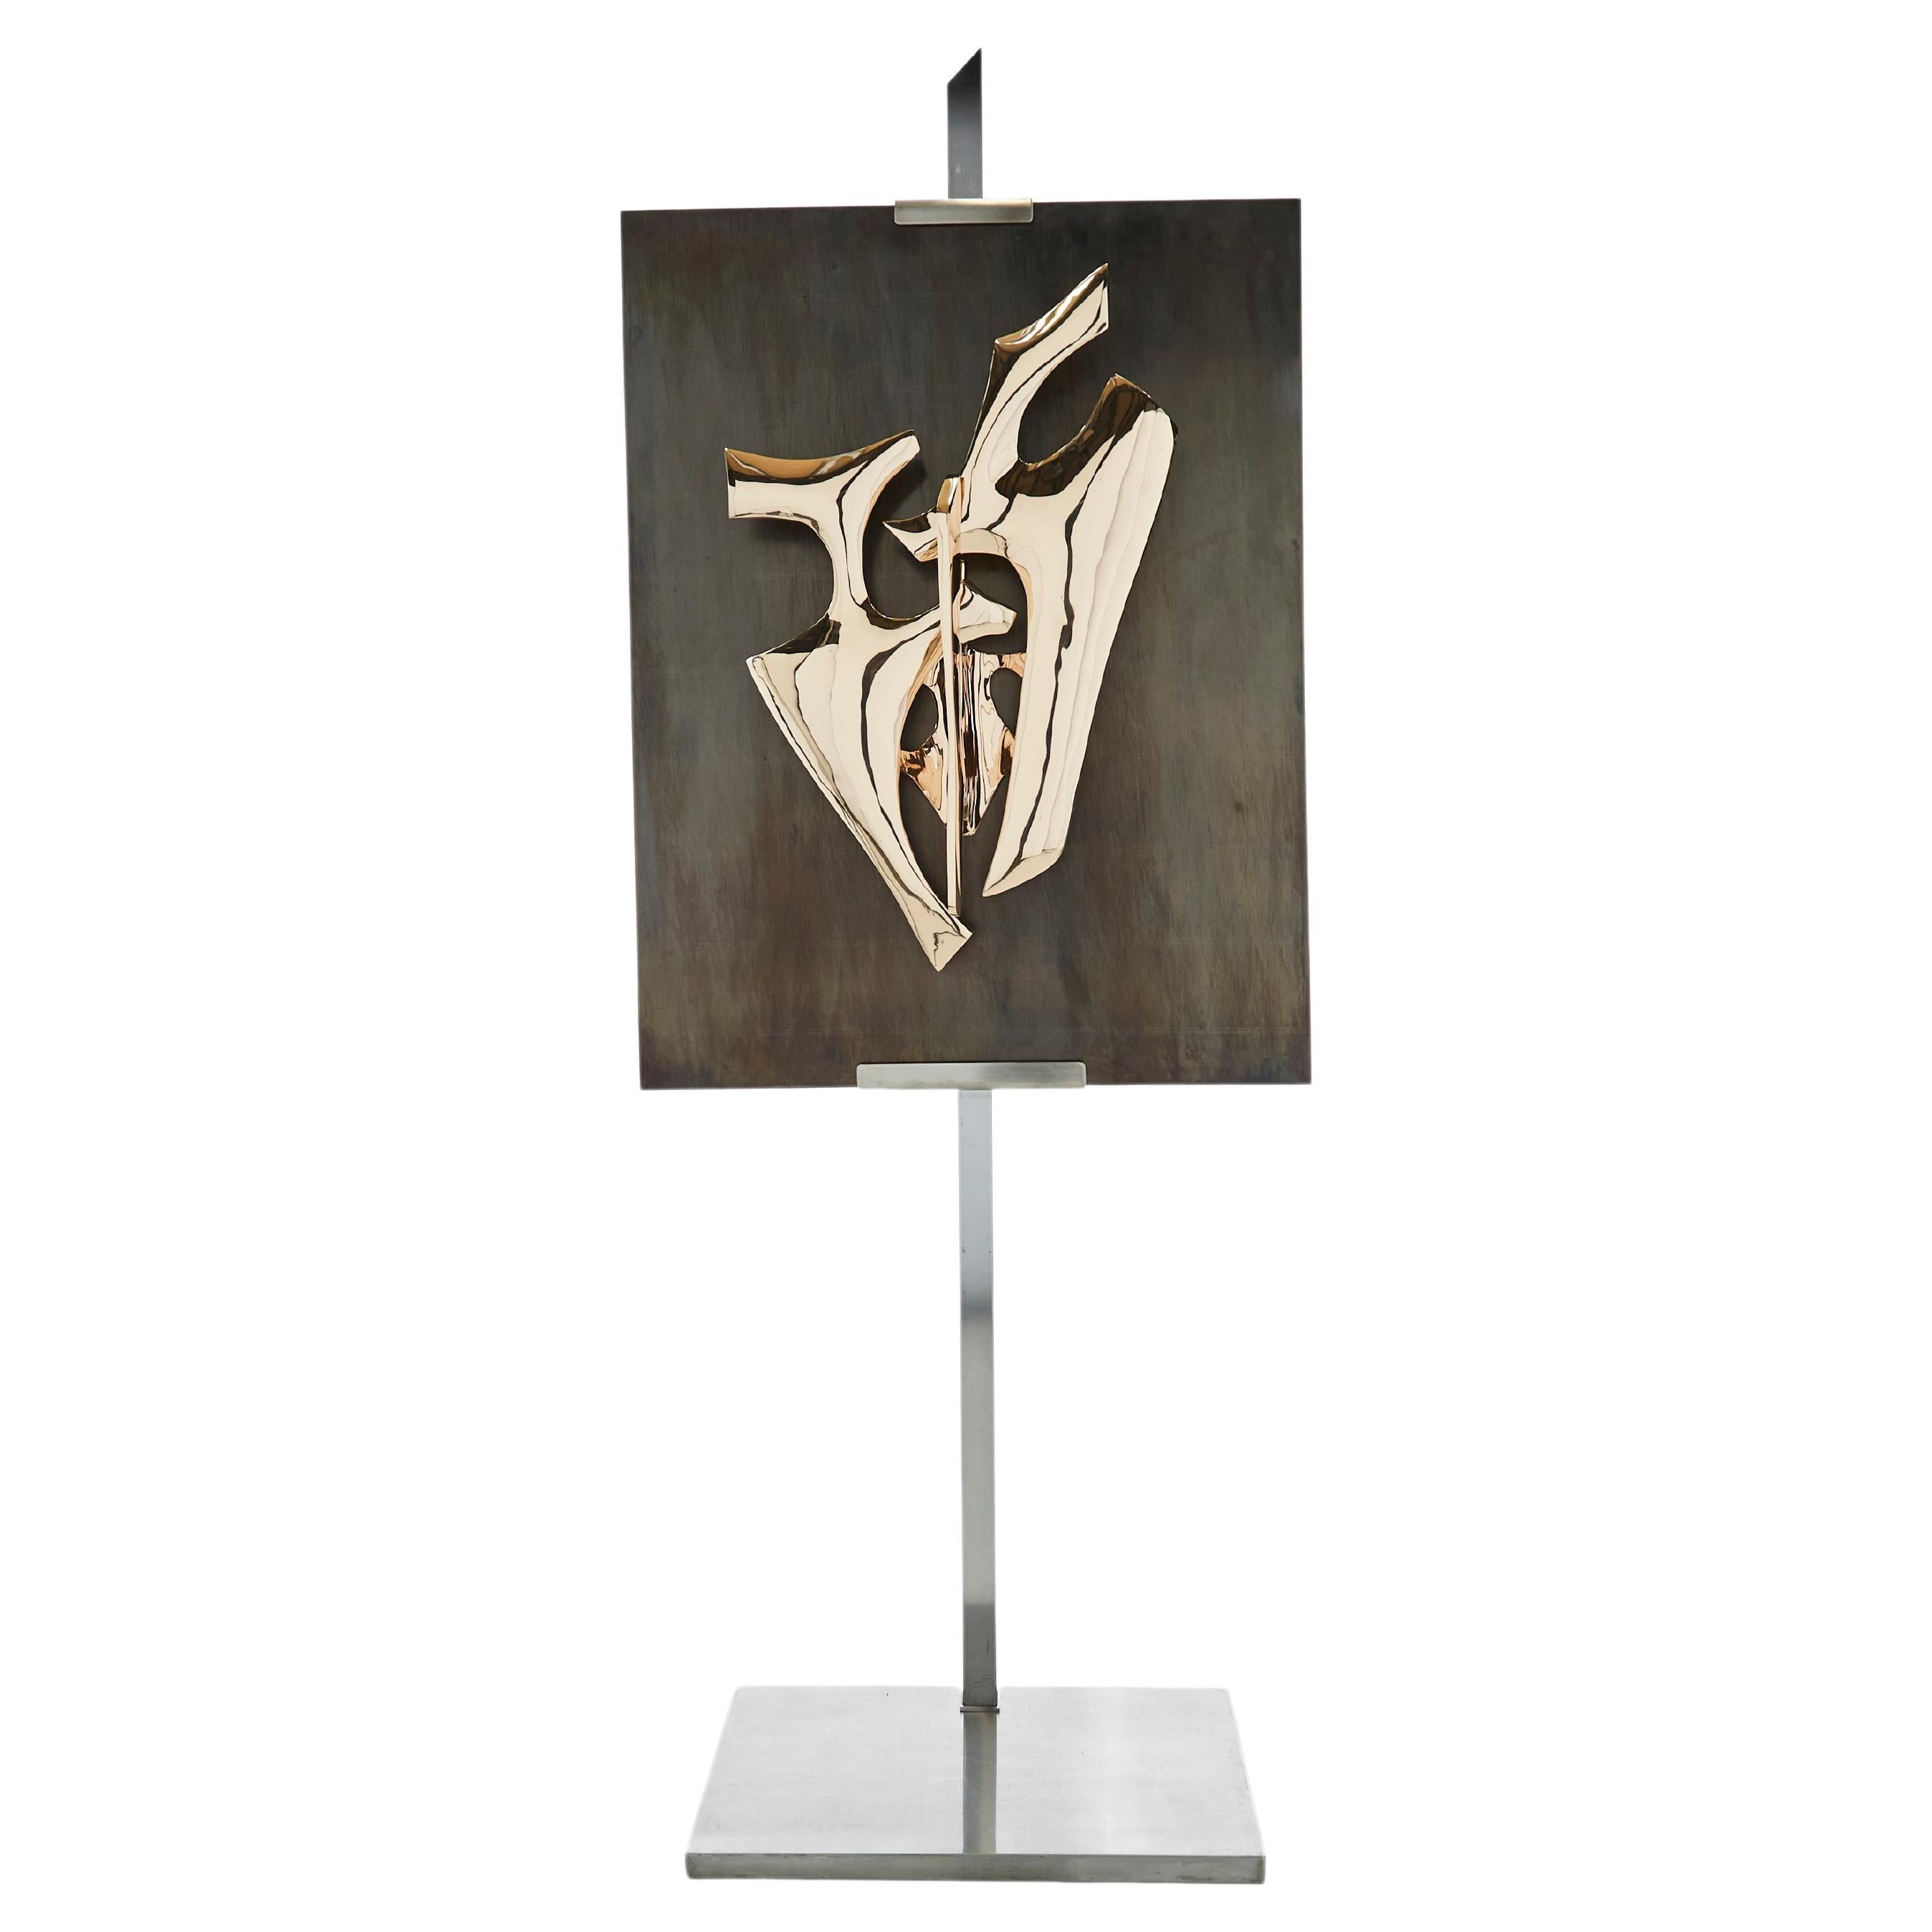 Signed Fred Brouard Steel Bronze Sculpture Chevalet Wall Lamp, 1976 For Sale